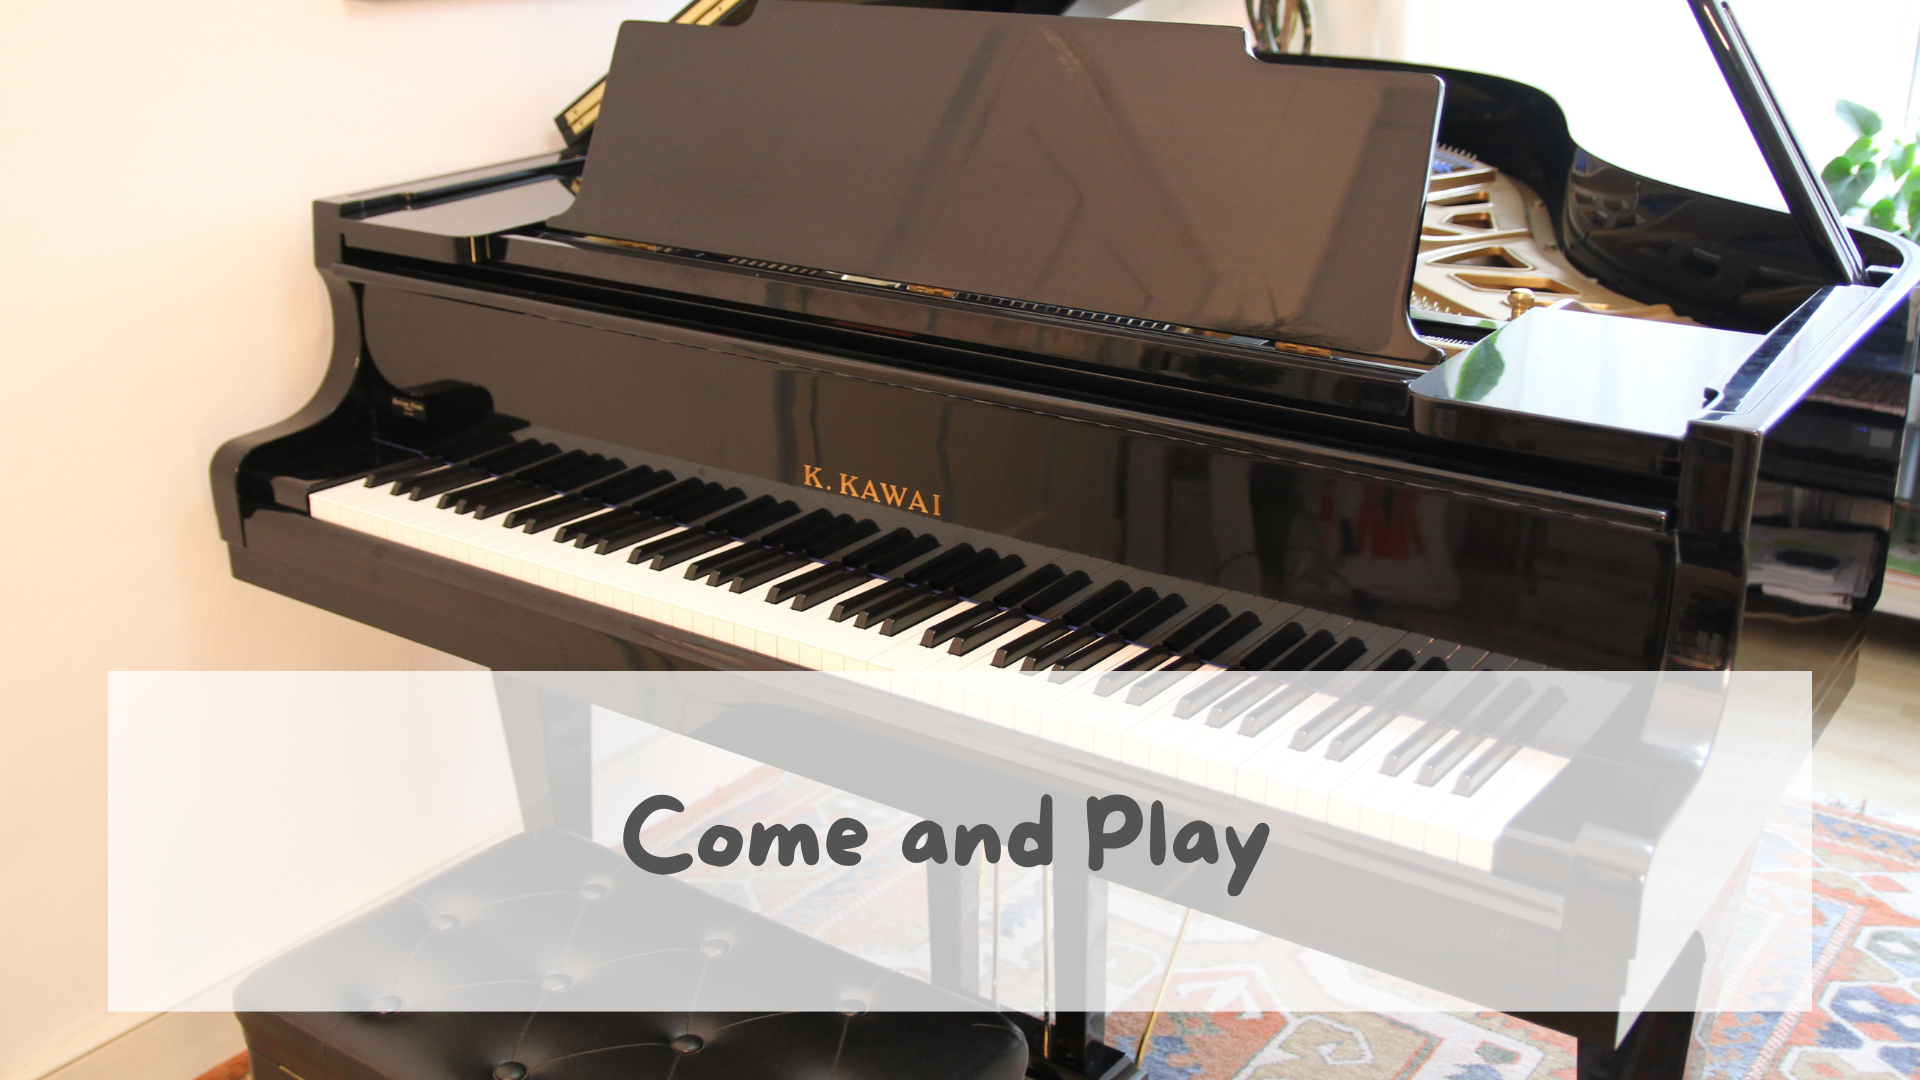 Come and Play is an opportunity for our students to come and play their pieces in an informal setting of Andrea’s piano room.